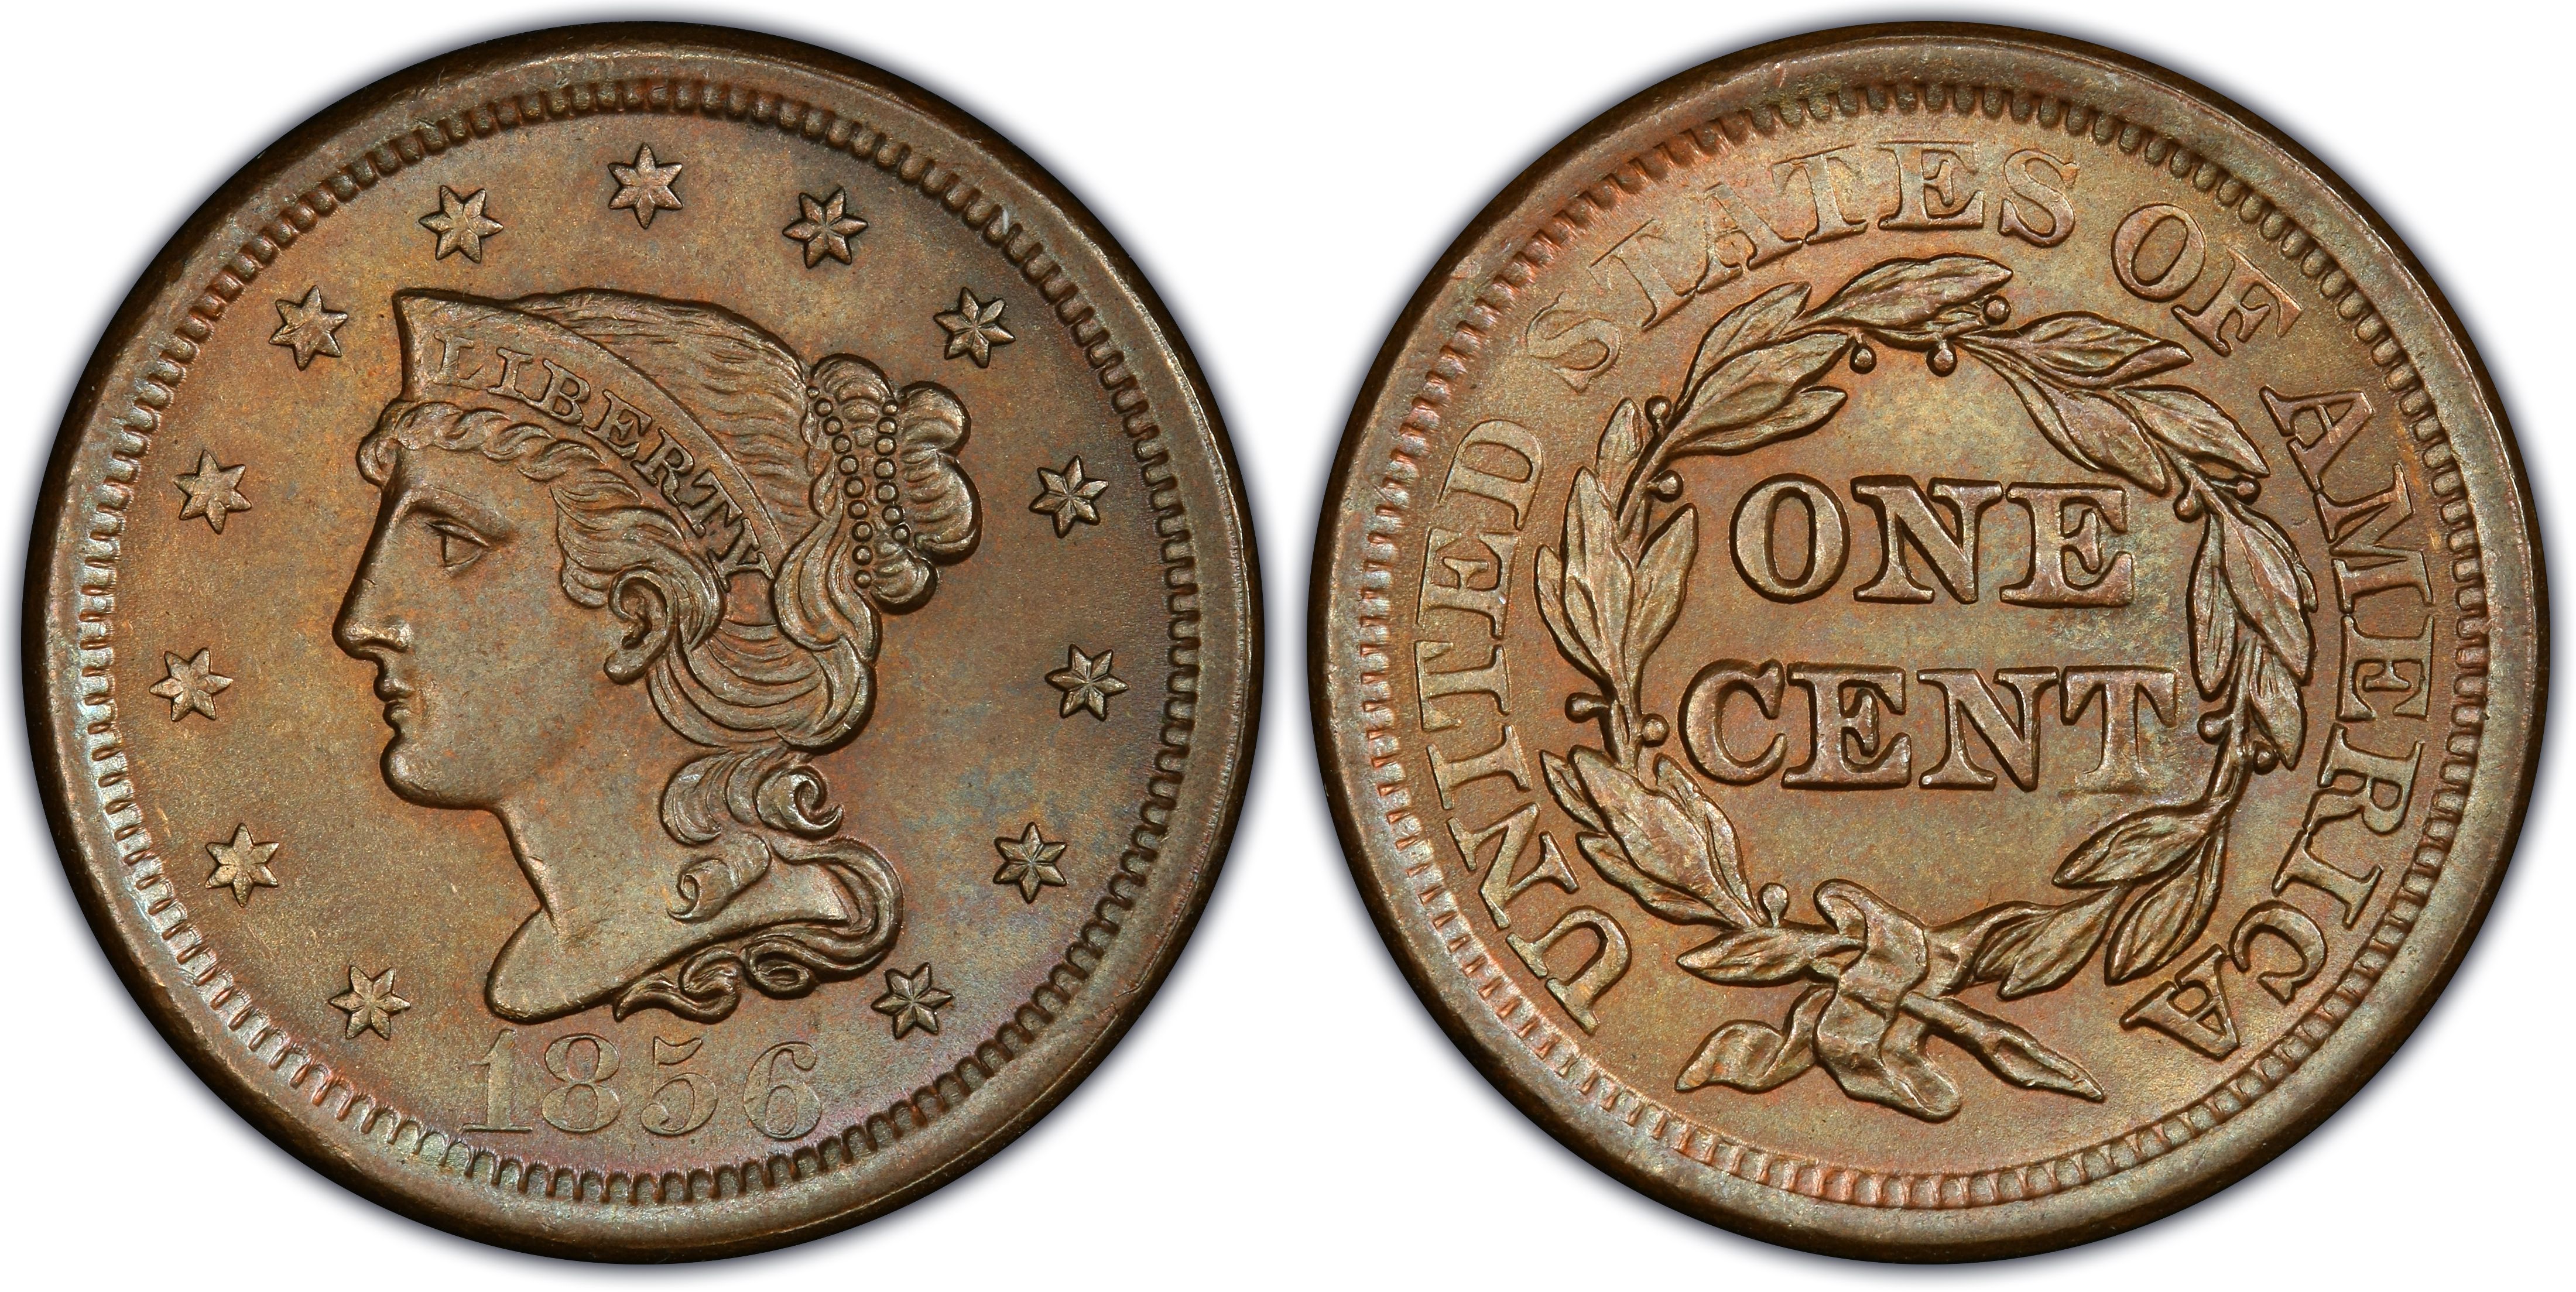 1856 1C Upright 5, BN (Regular Strike) Braided Hair Cent - PCGS CoinFacts